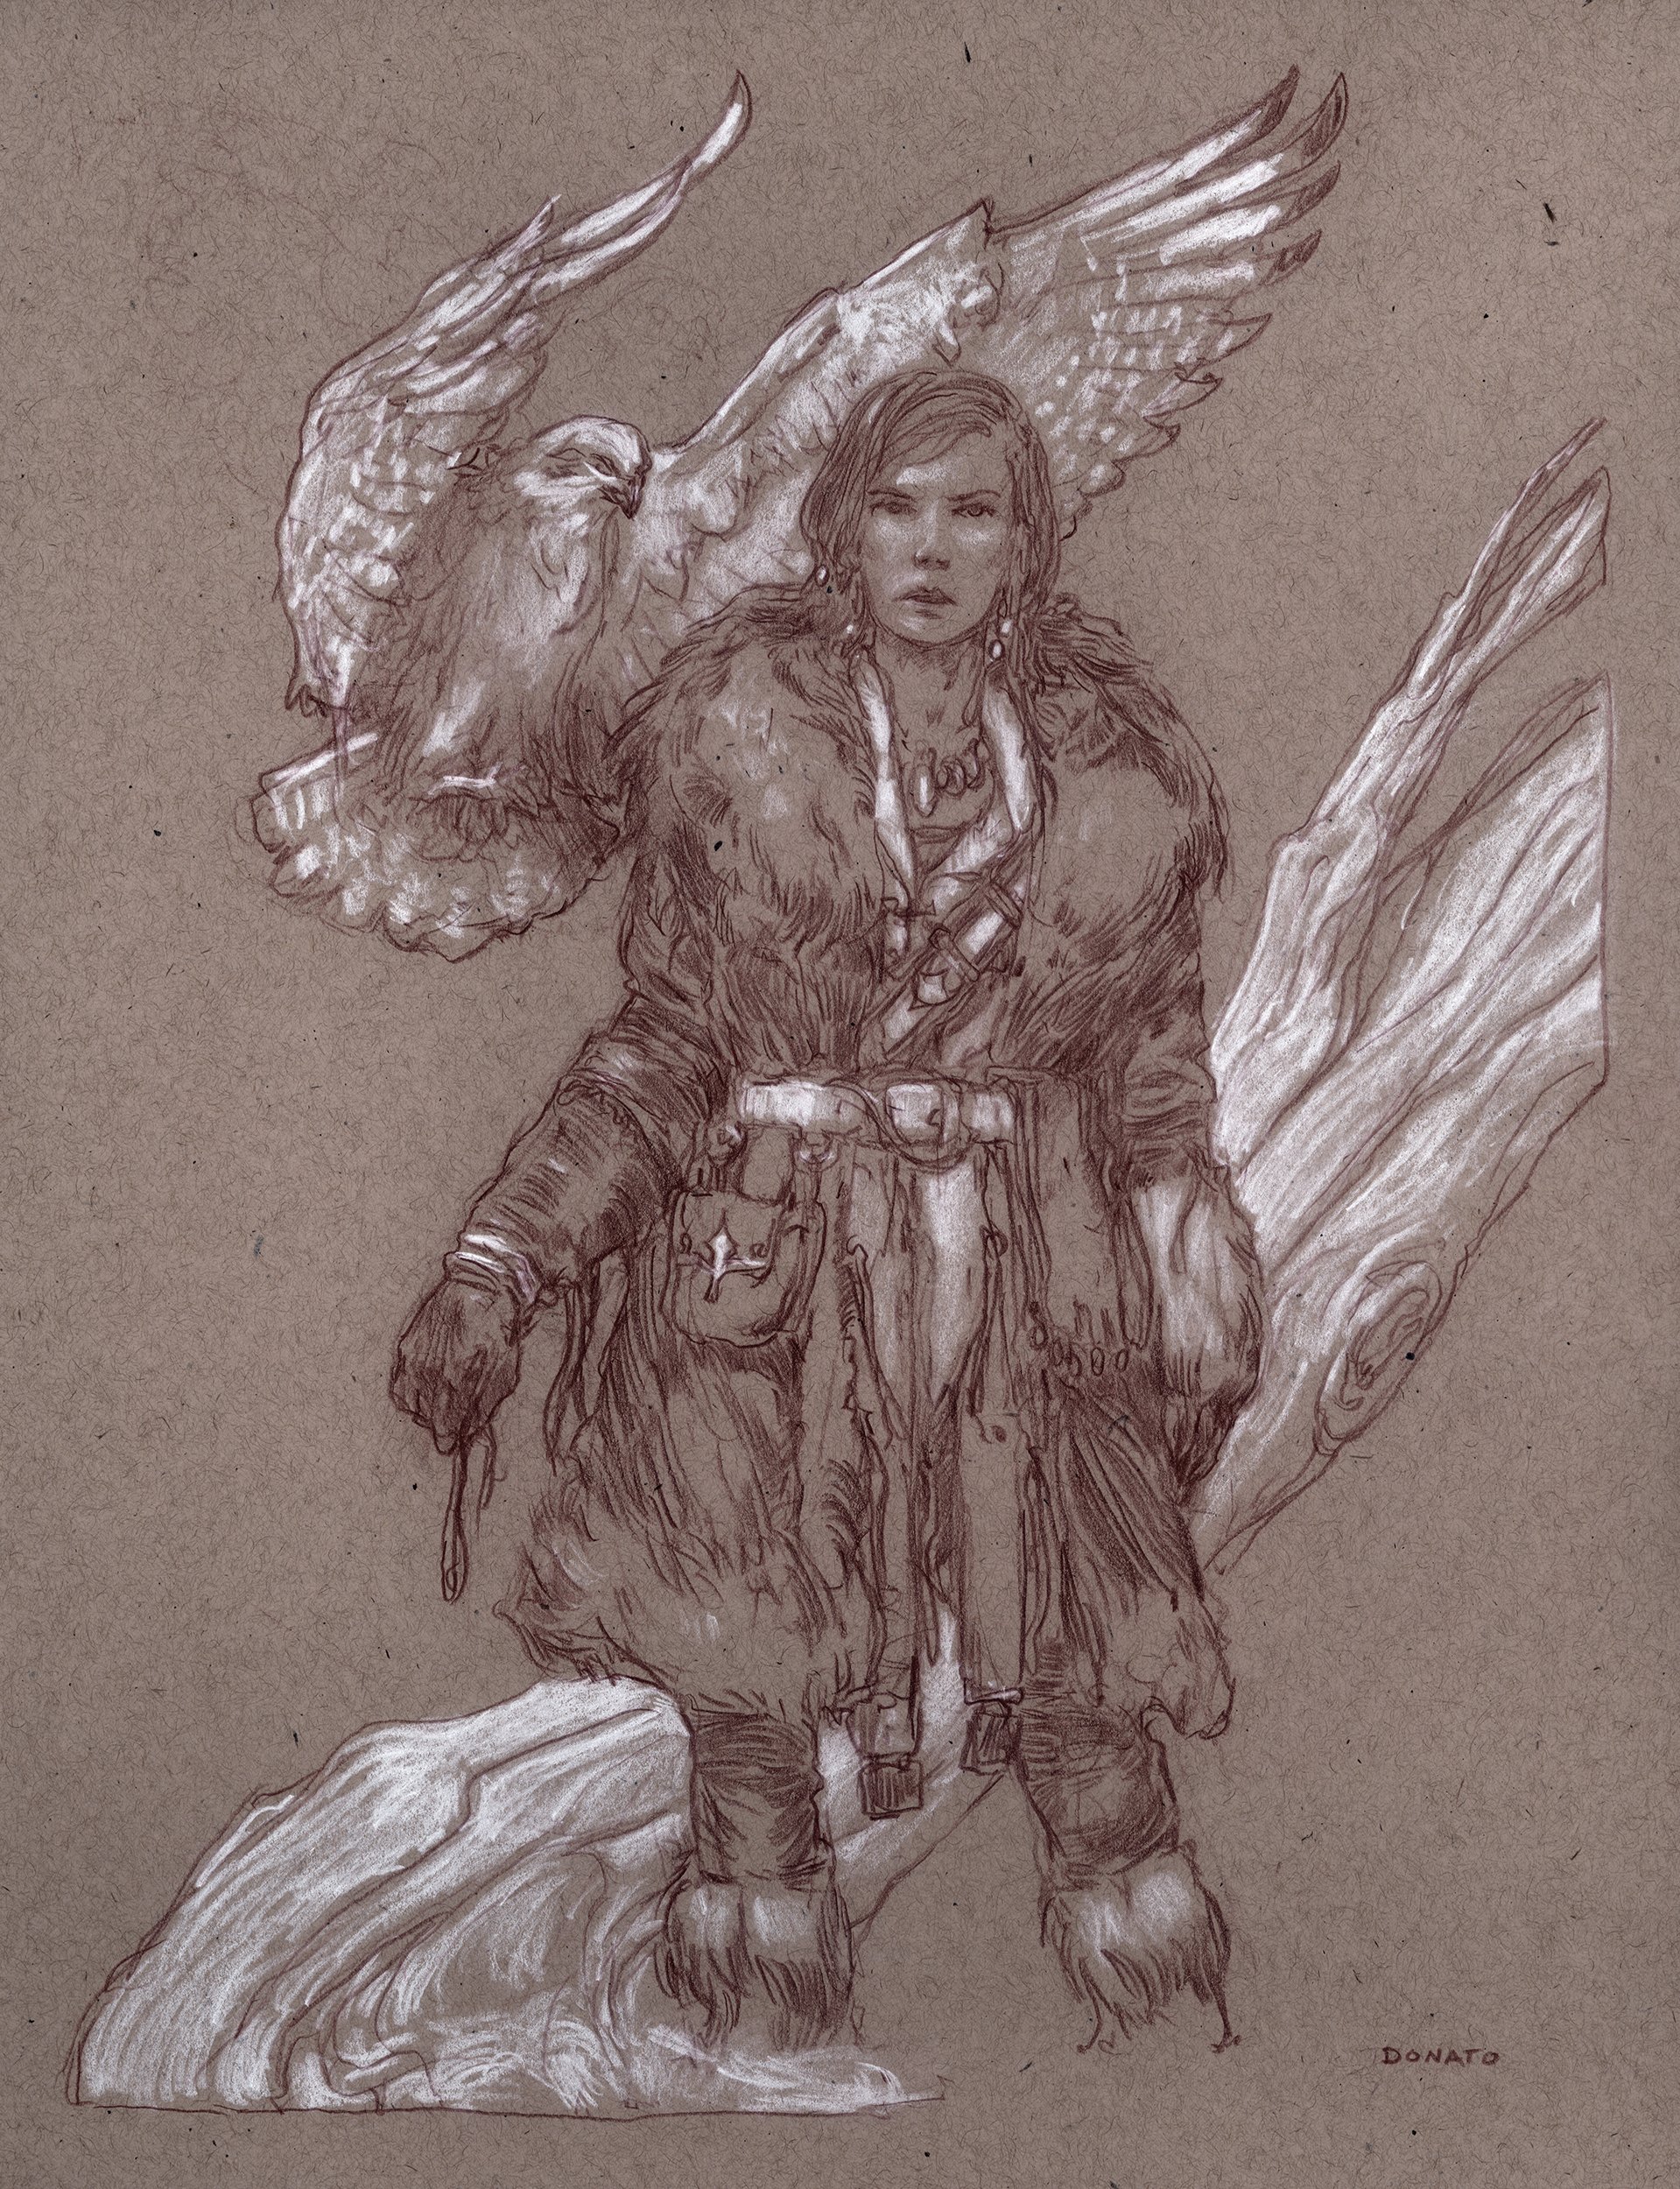 Warg
14" x 11"  Watercolor and chalk on toned paper
private collection